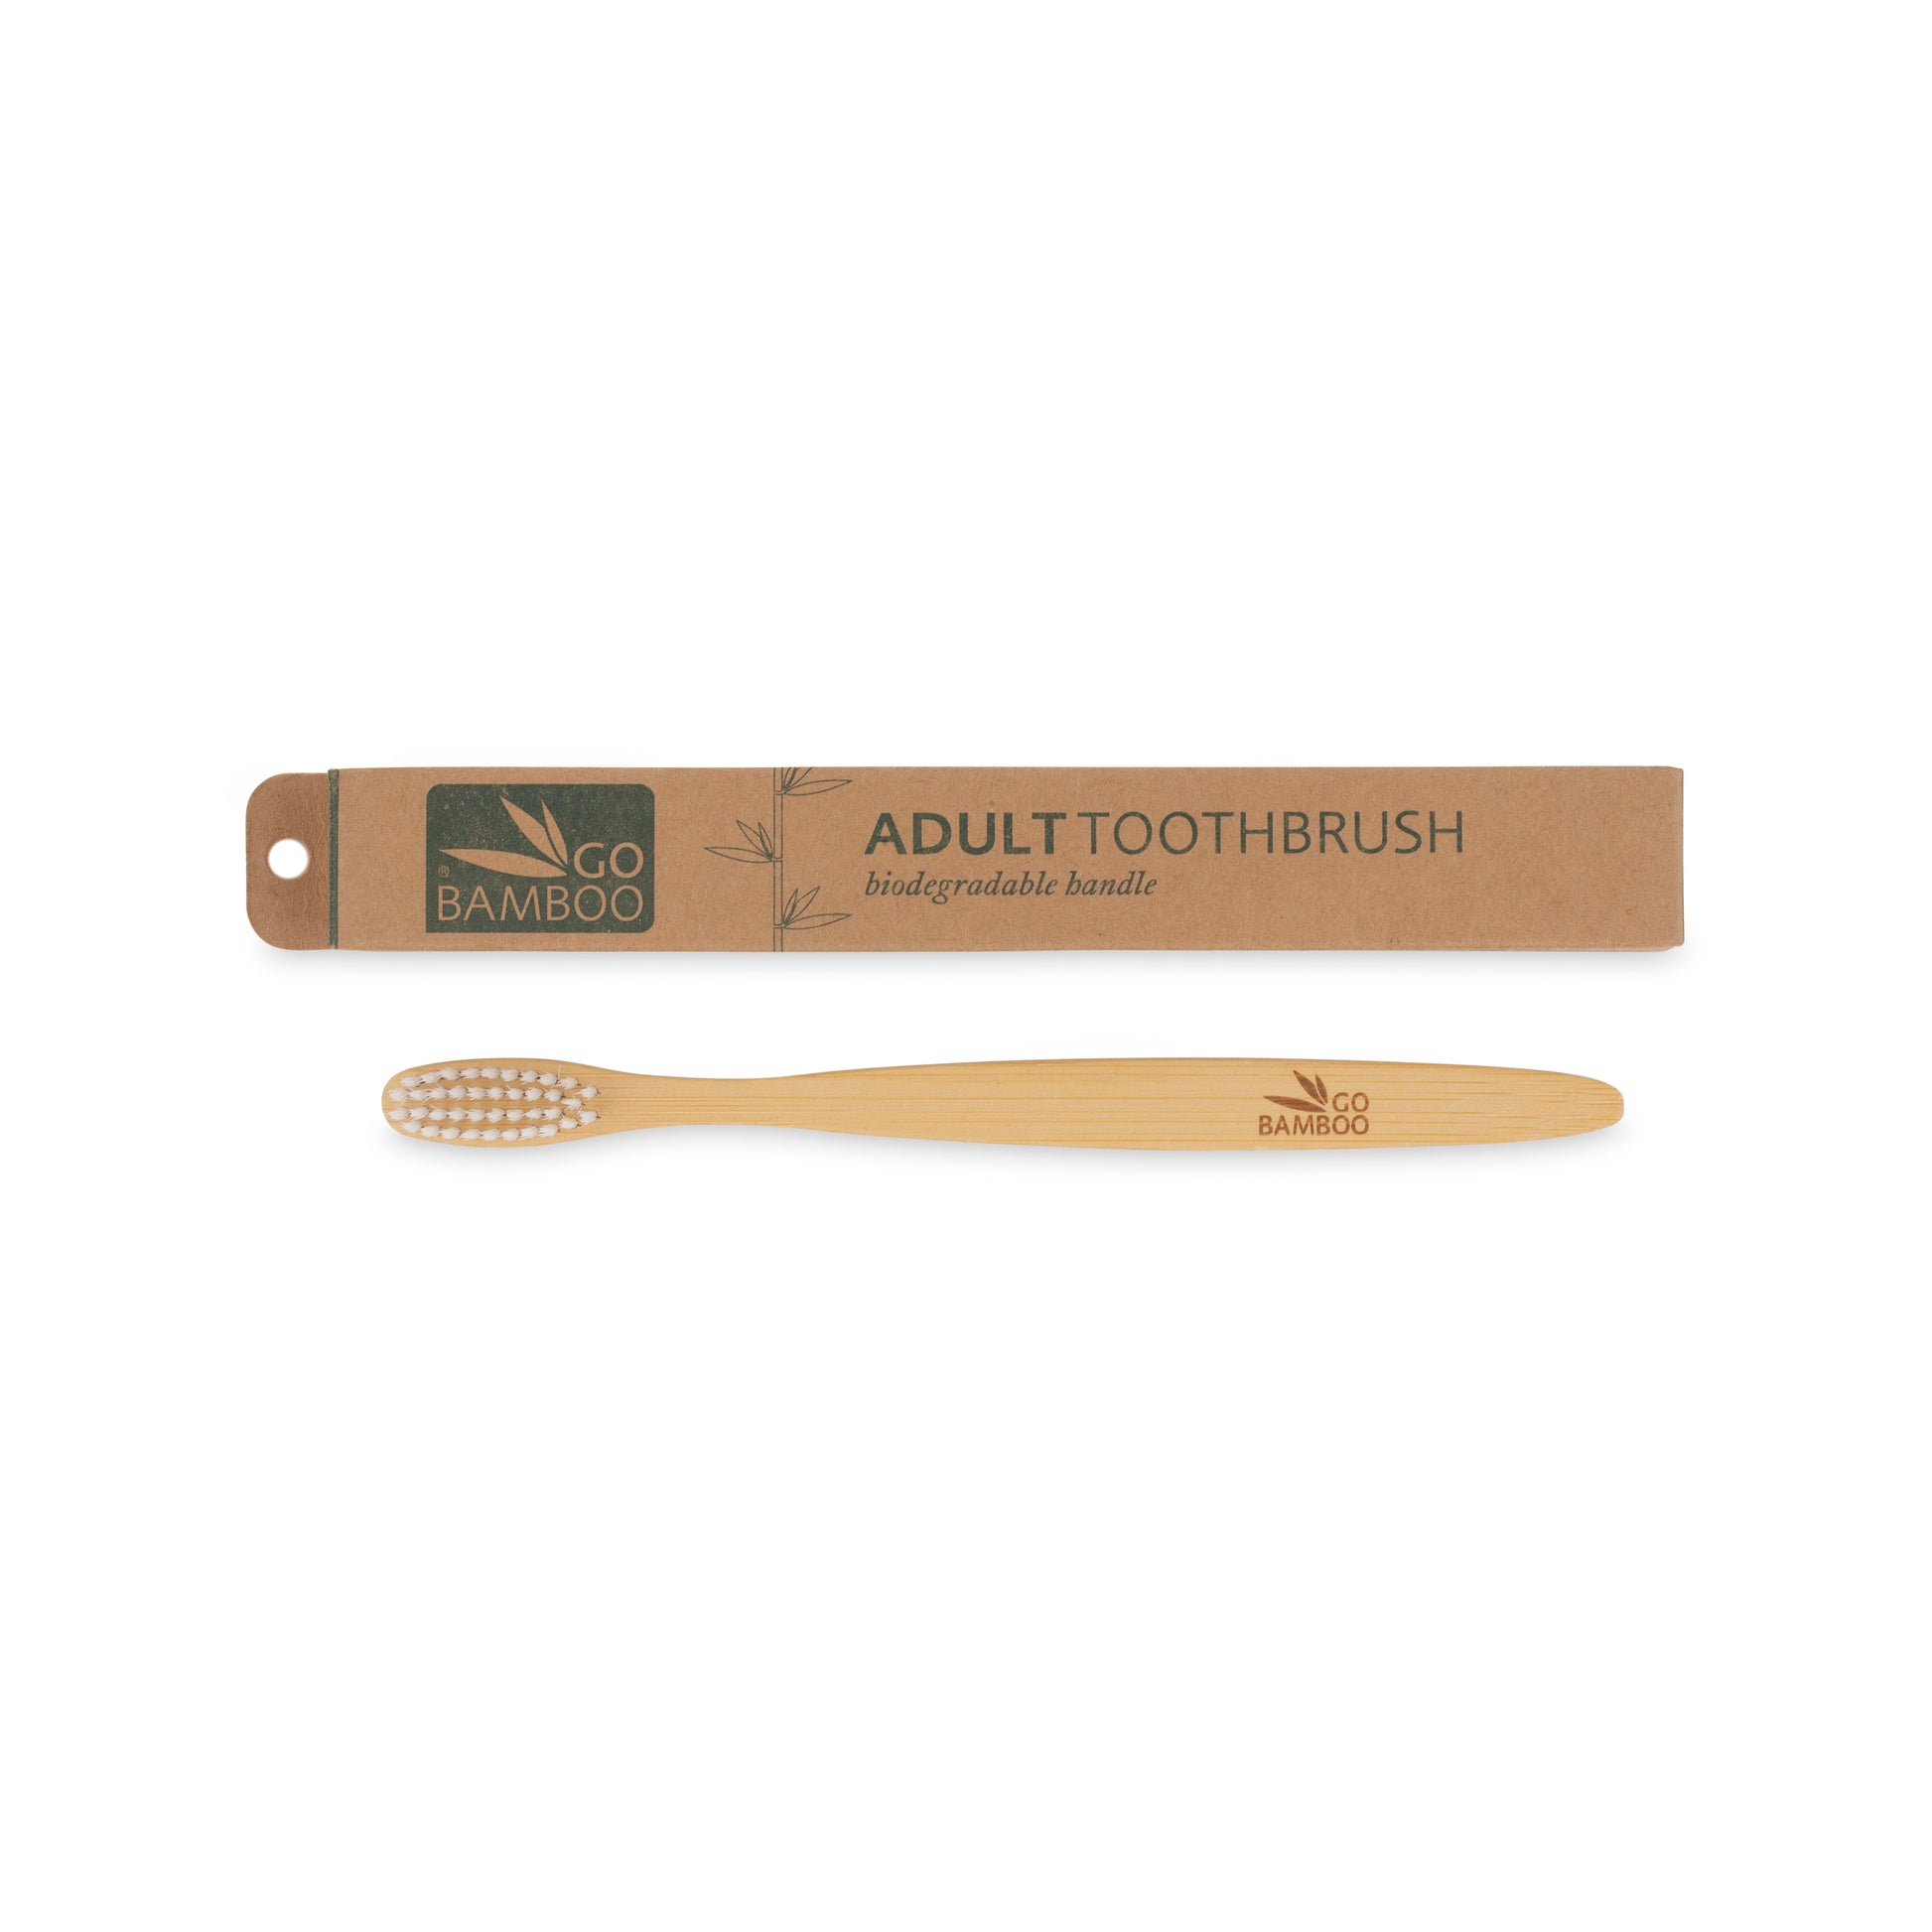 Eco Friendly Toothbrush - Adult Toothbrush - Go Bamboo